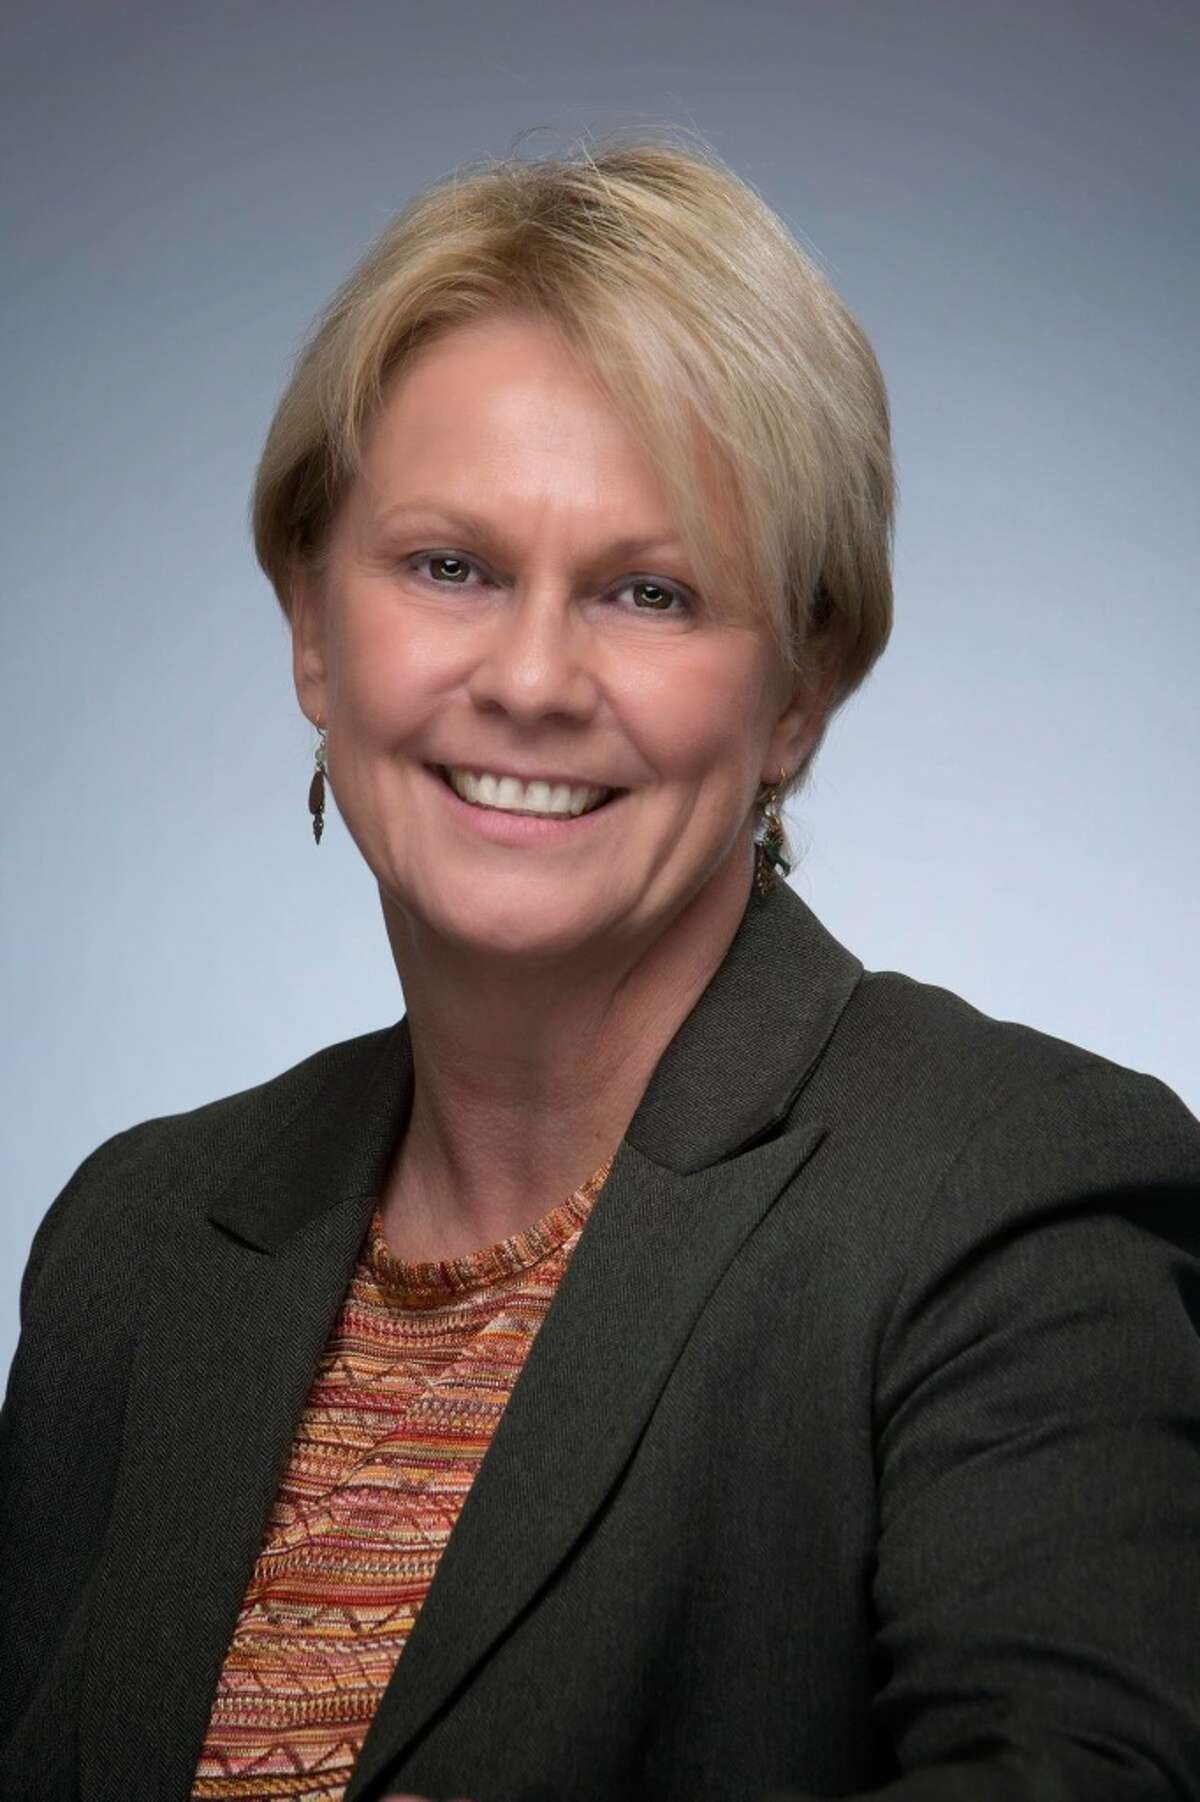 Houston-based Occidental Petroleum Corp. on May 5, 2015 named Vicki Hollub to succeed retiring President and CEO Stephen Chazen, making her the first female president of a major oil and gas firm. See the other faces behind Houston's biggest companies.